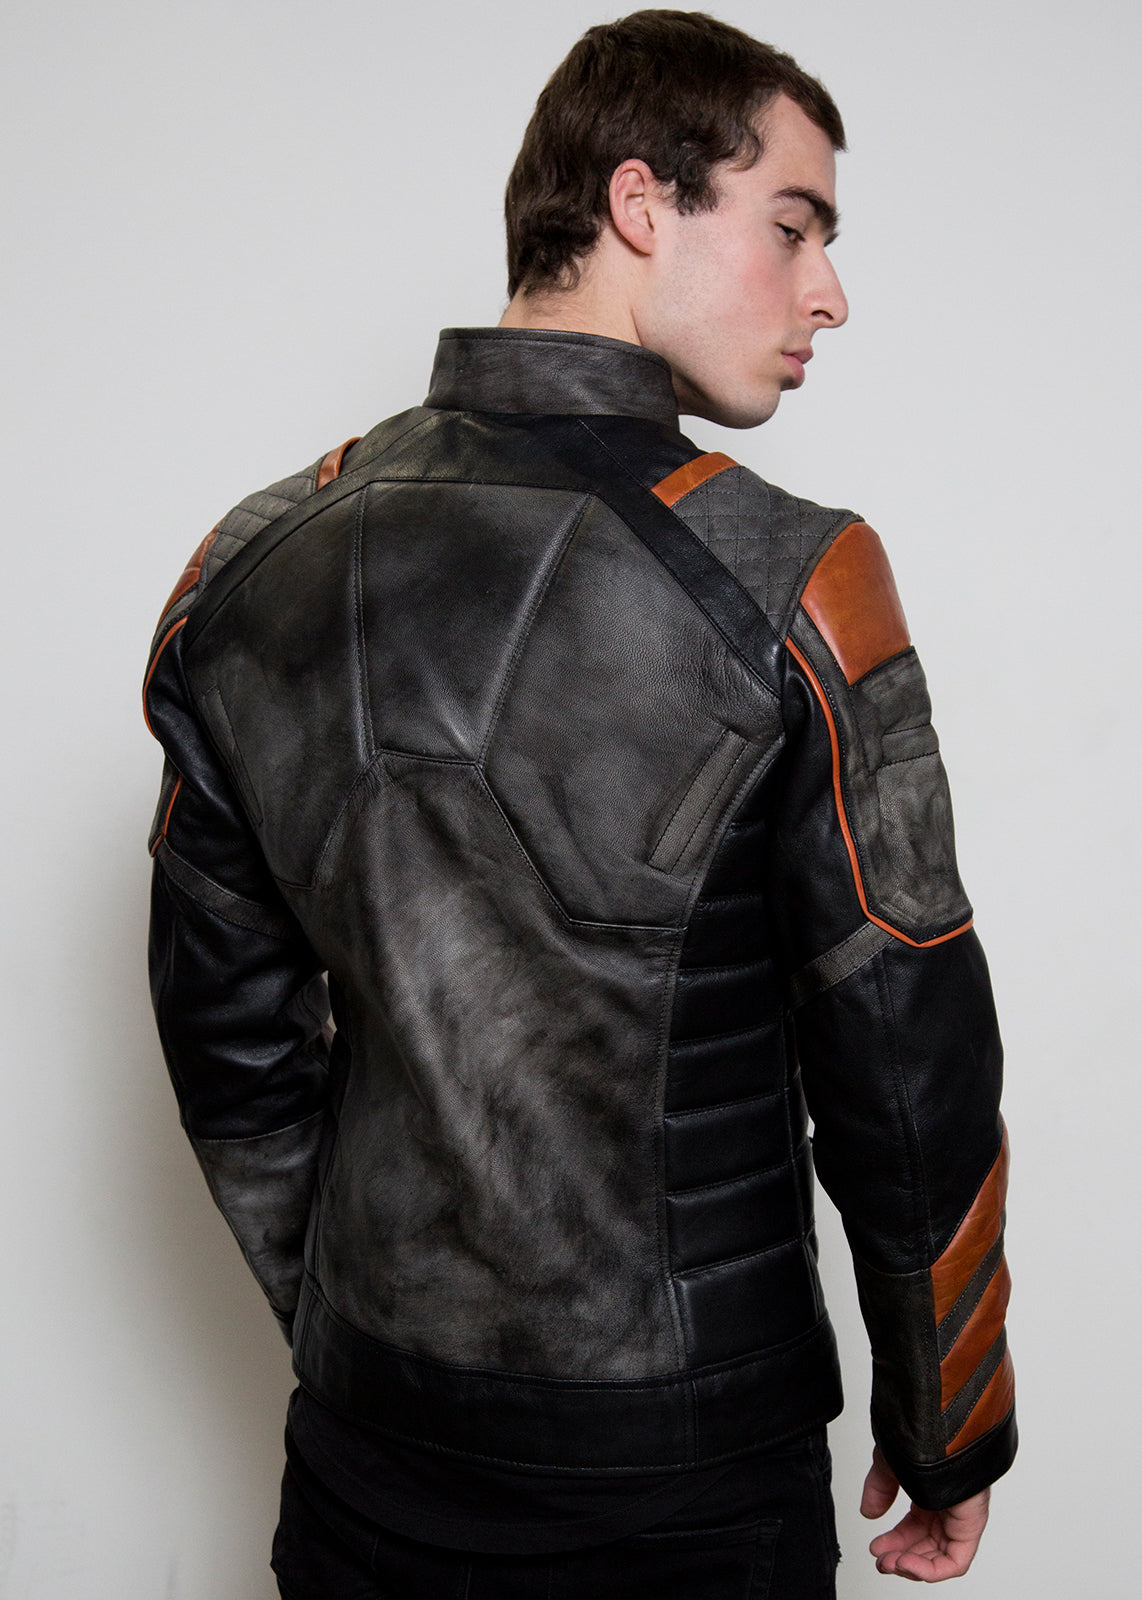 deathstroke knights and dragon armor leather jacket